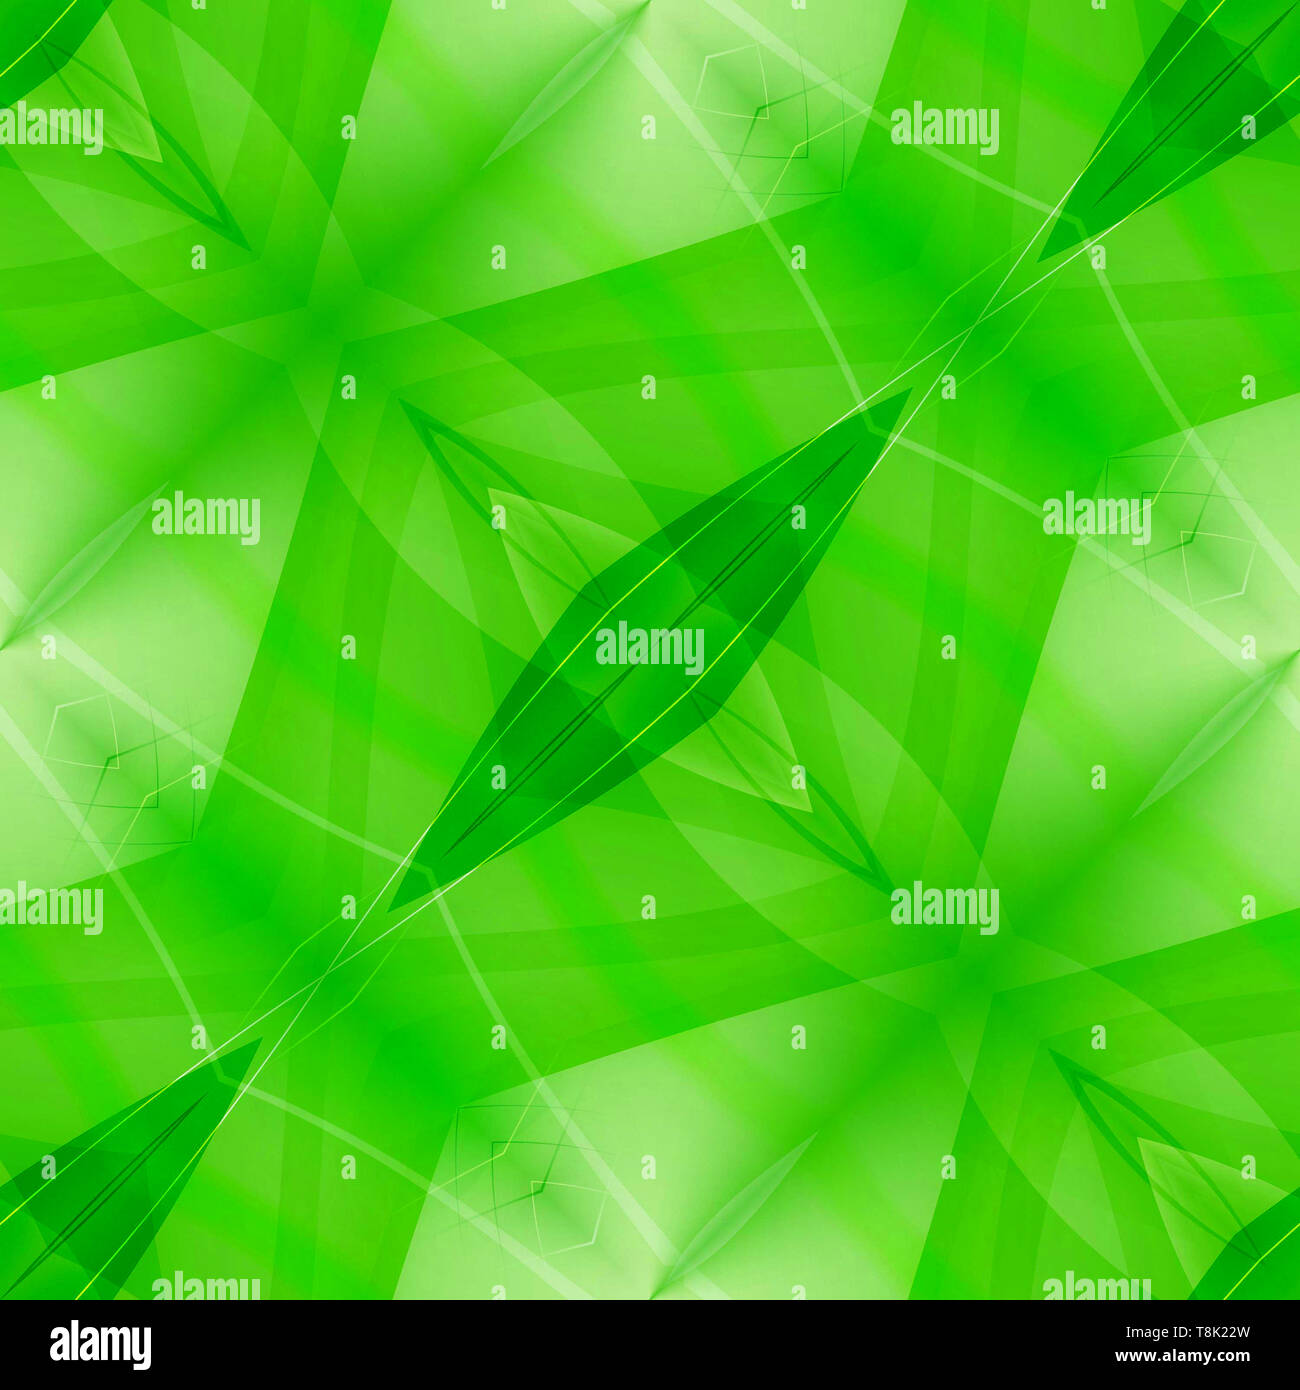 Green abstract seamless background Stock Photo